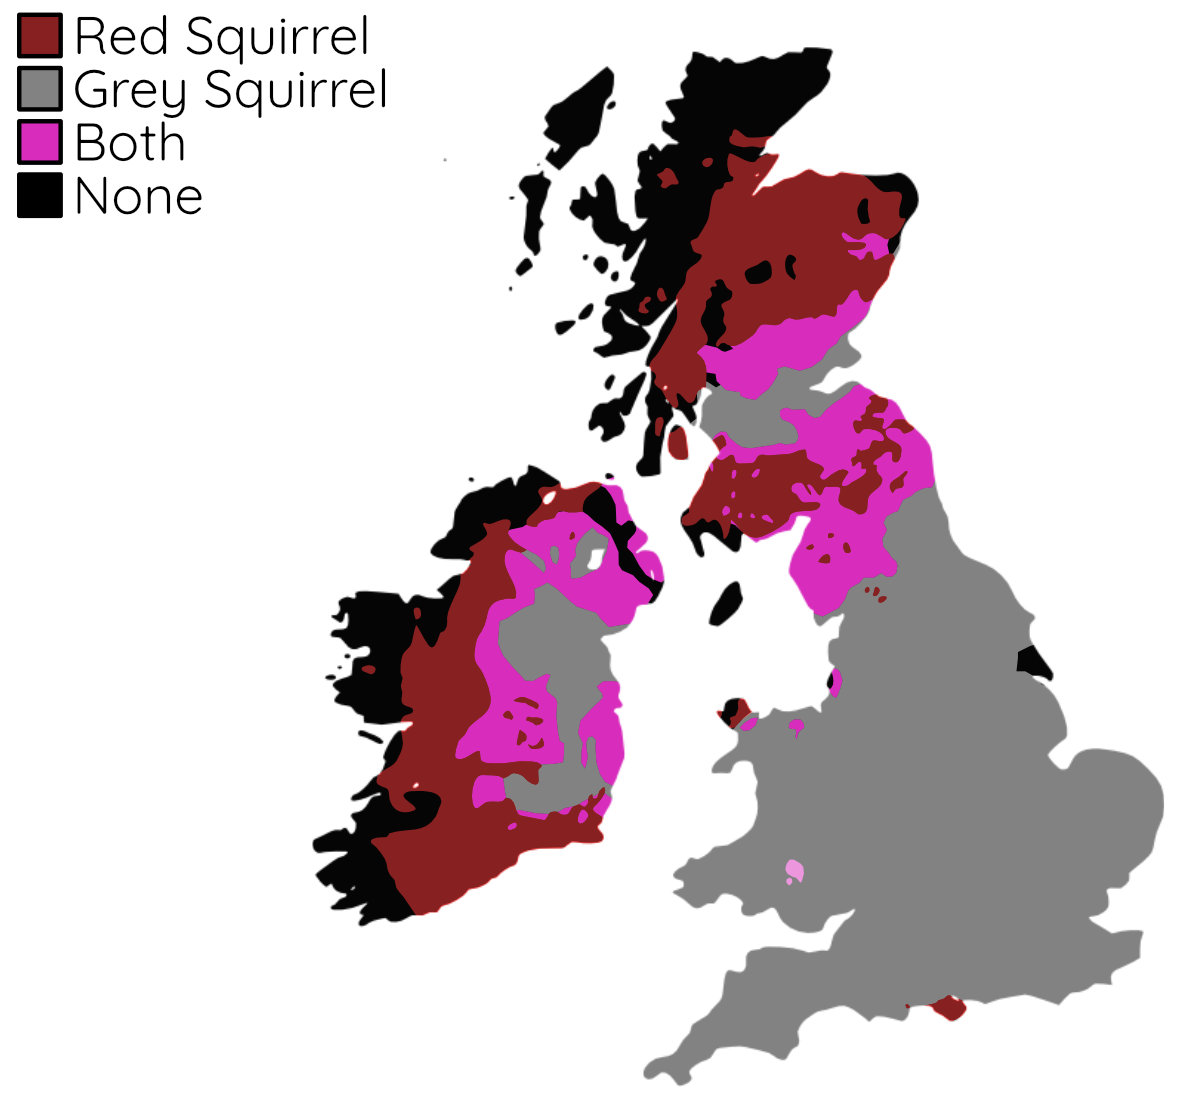 A map roughly showing the boundaries of red vs grey squirrels